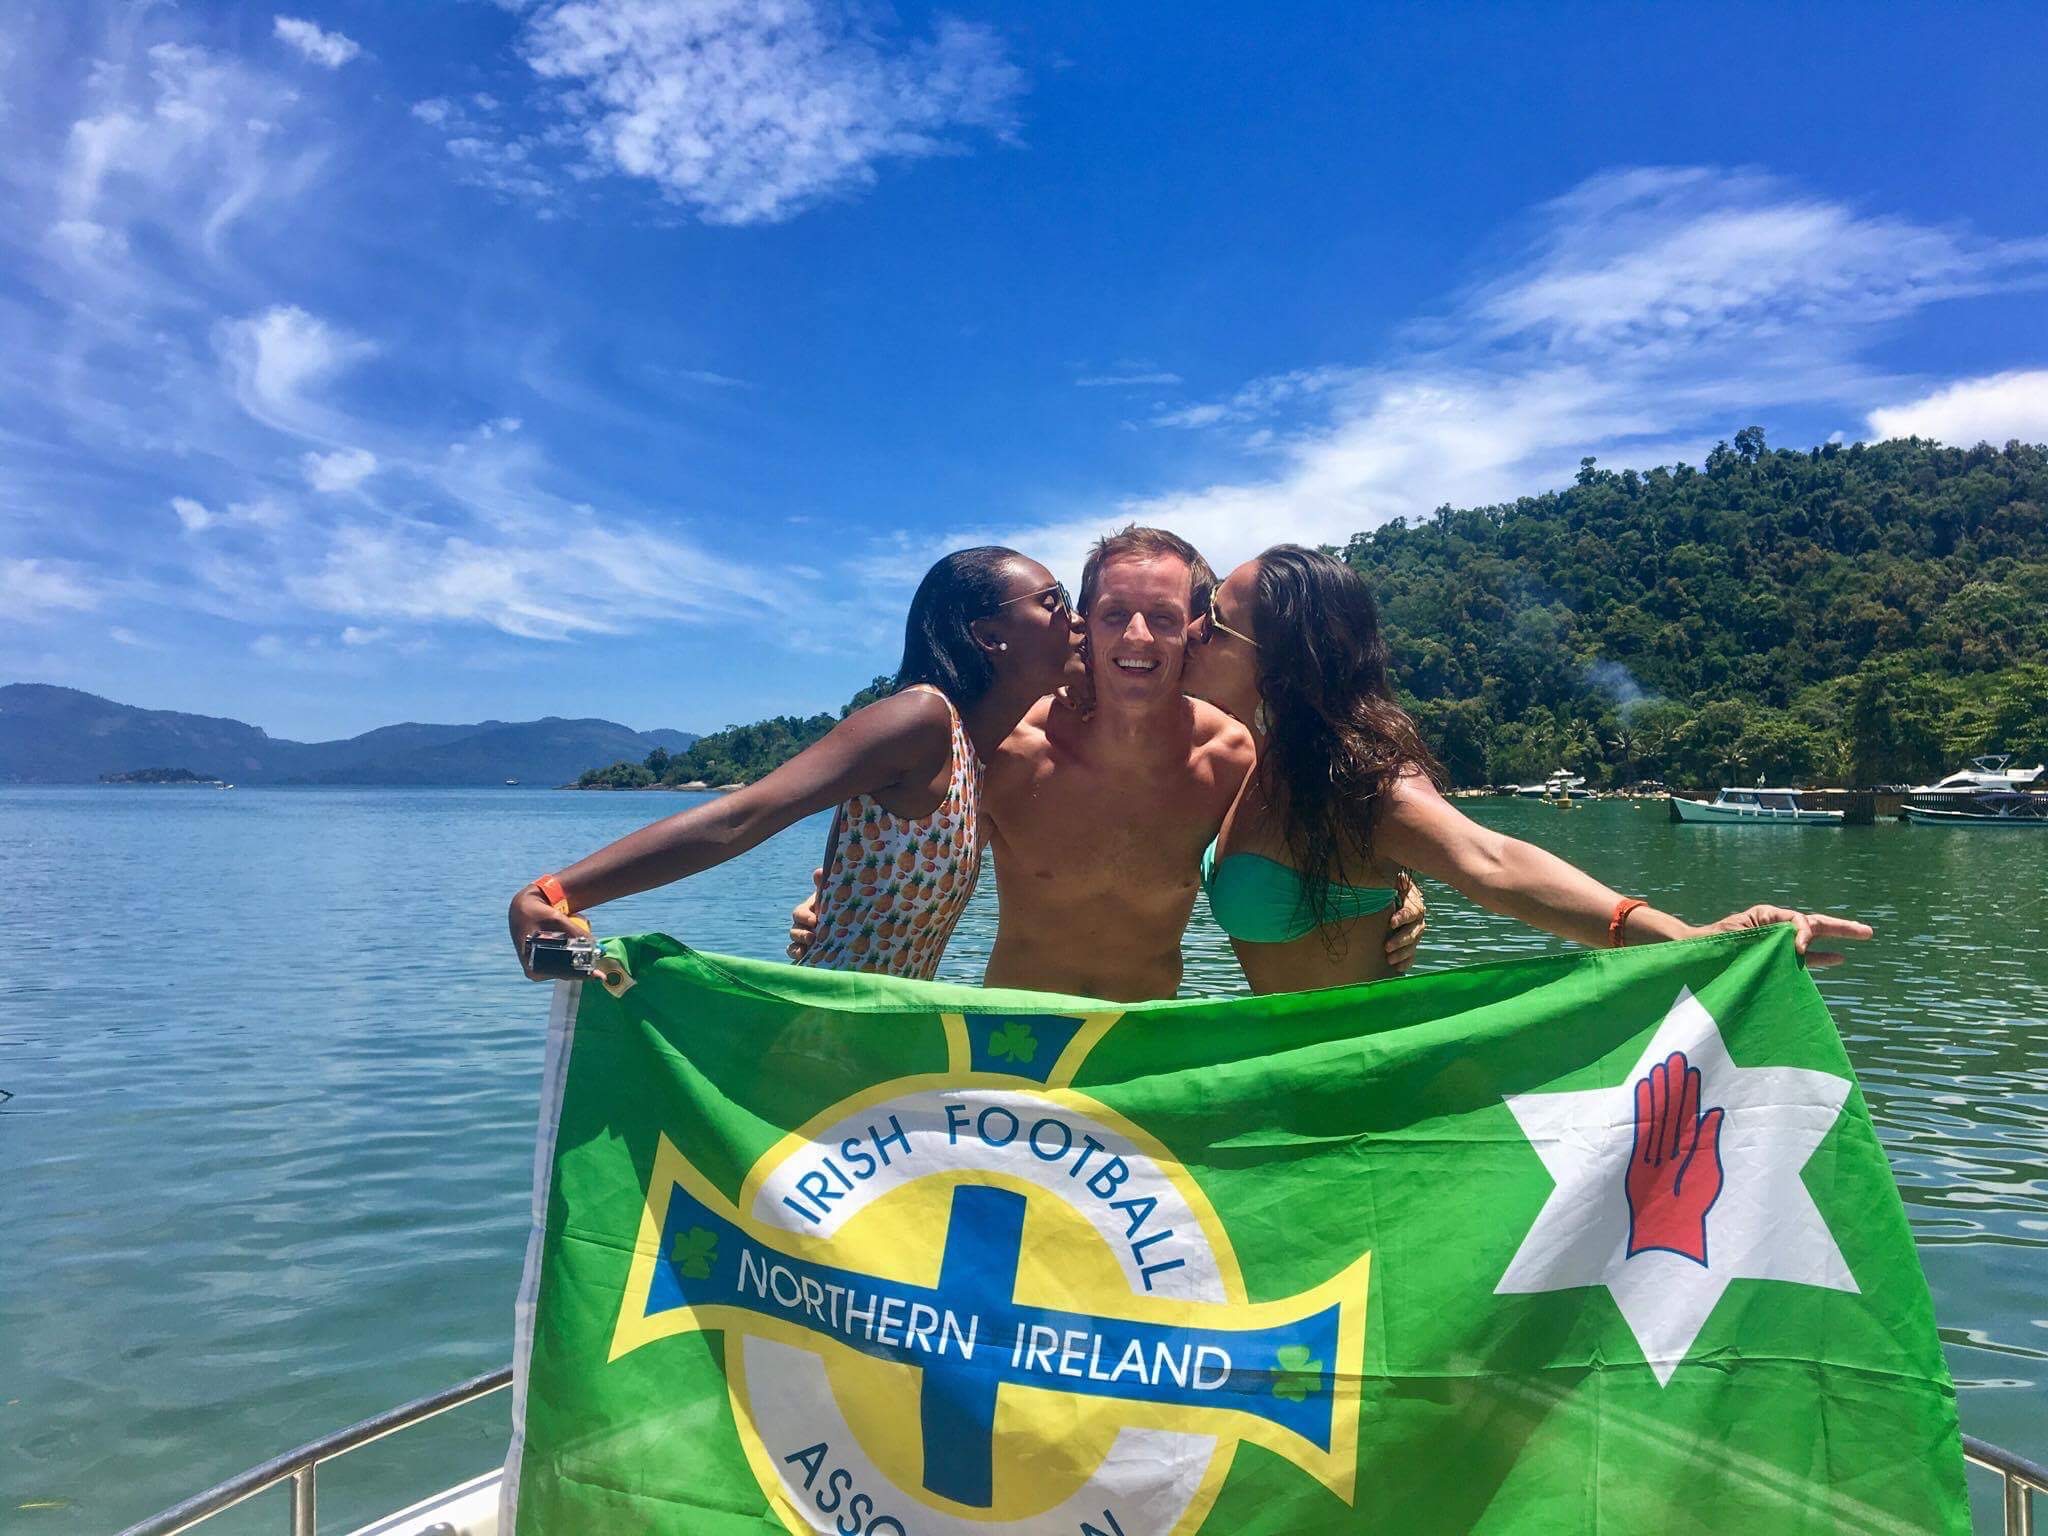 David Simpson being kissed by two friend girls while holding NI flag at speedboat tour in Ilha Grande, Brazil. Ilha Grande cures the hangover from hell